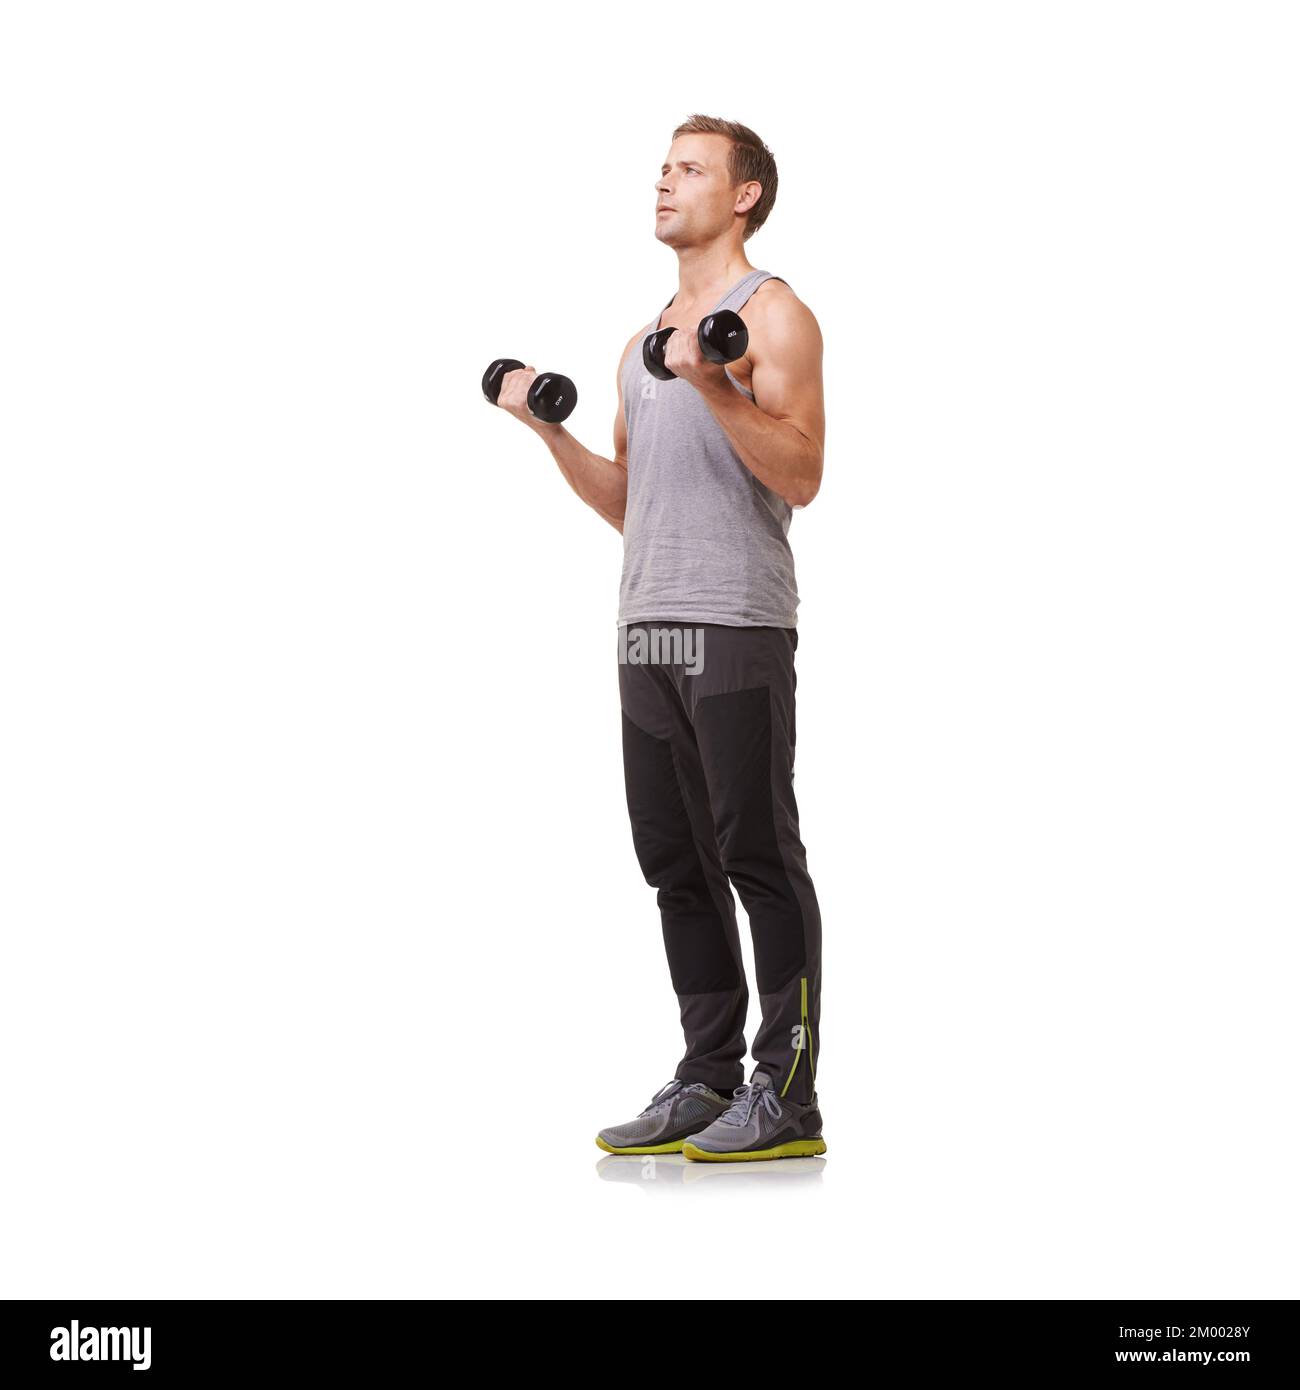 Exercise is part of his daily routine. Full-body of a fit young man doing bicep curls while isolated on a white background. Stock Photo